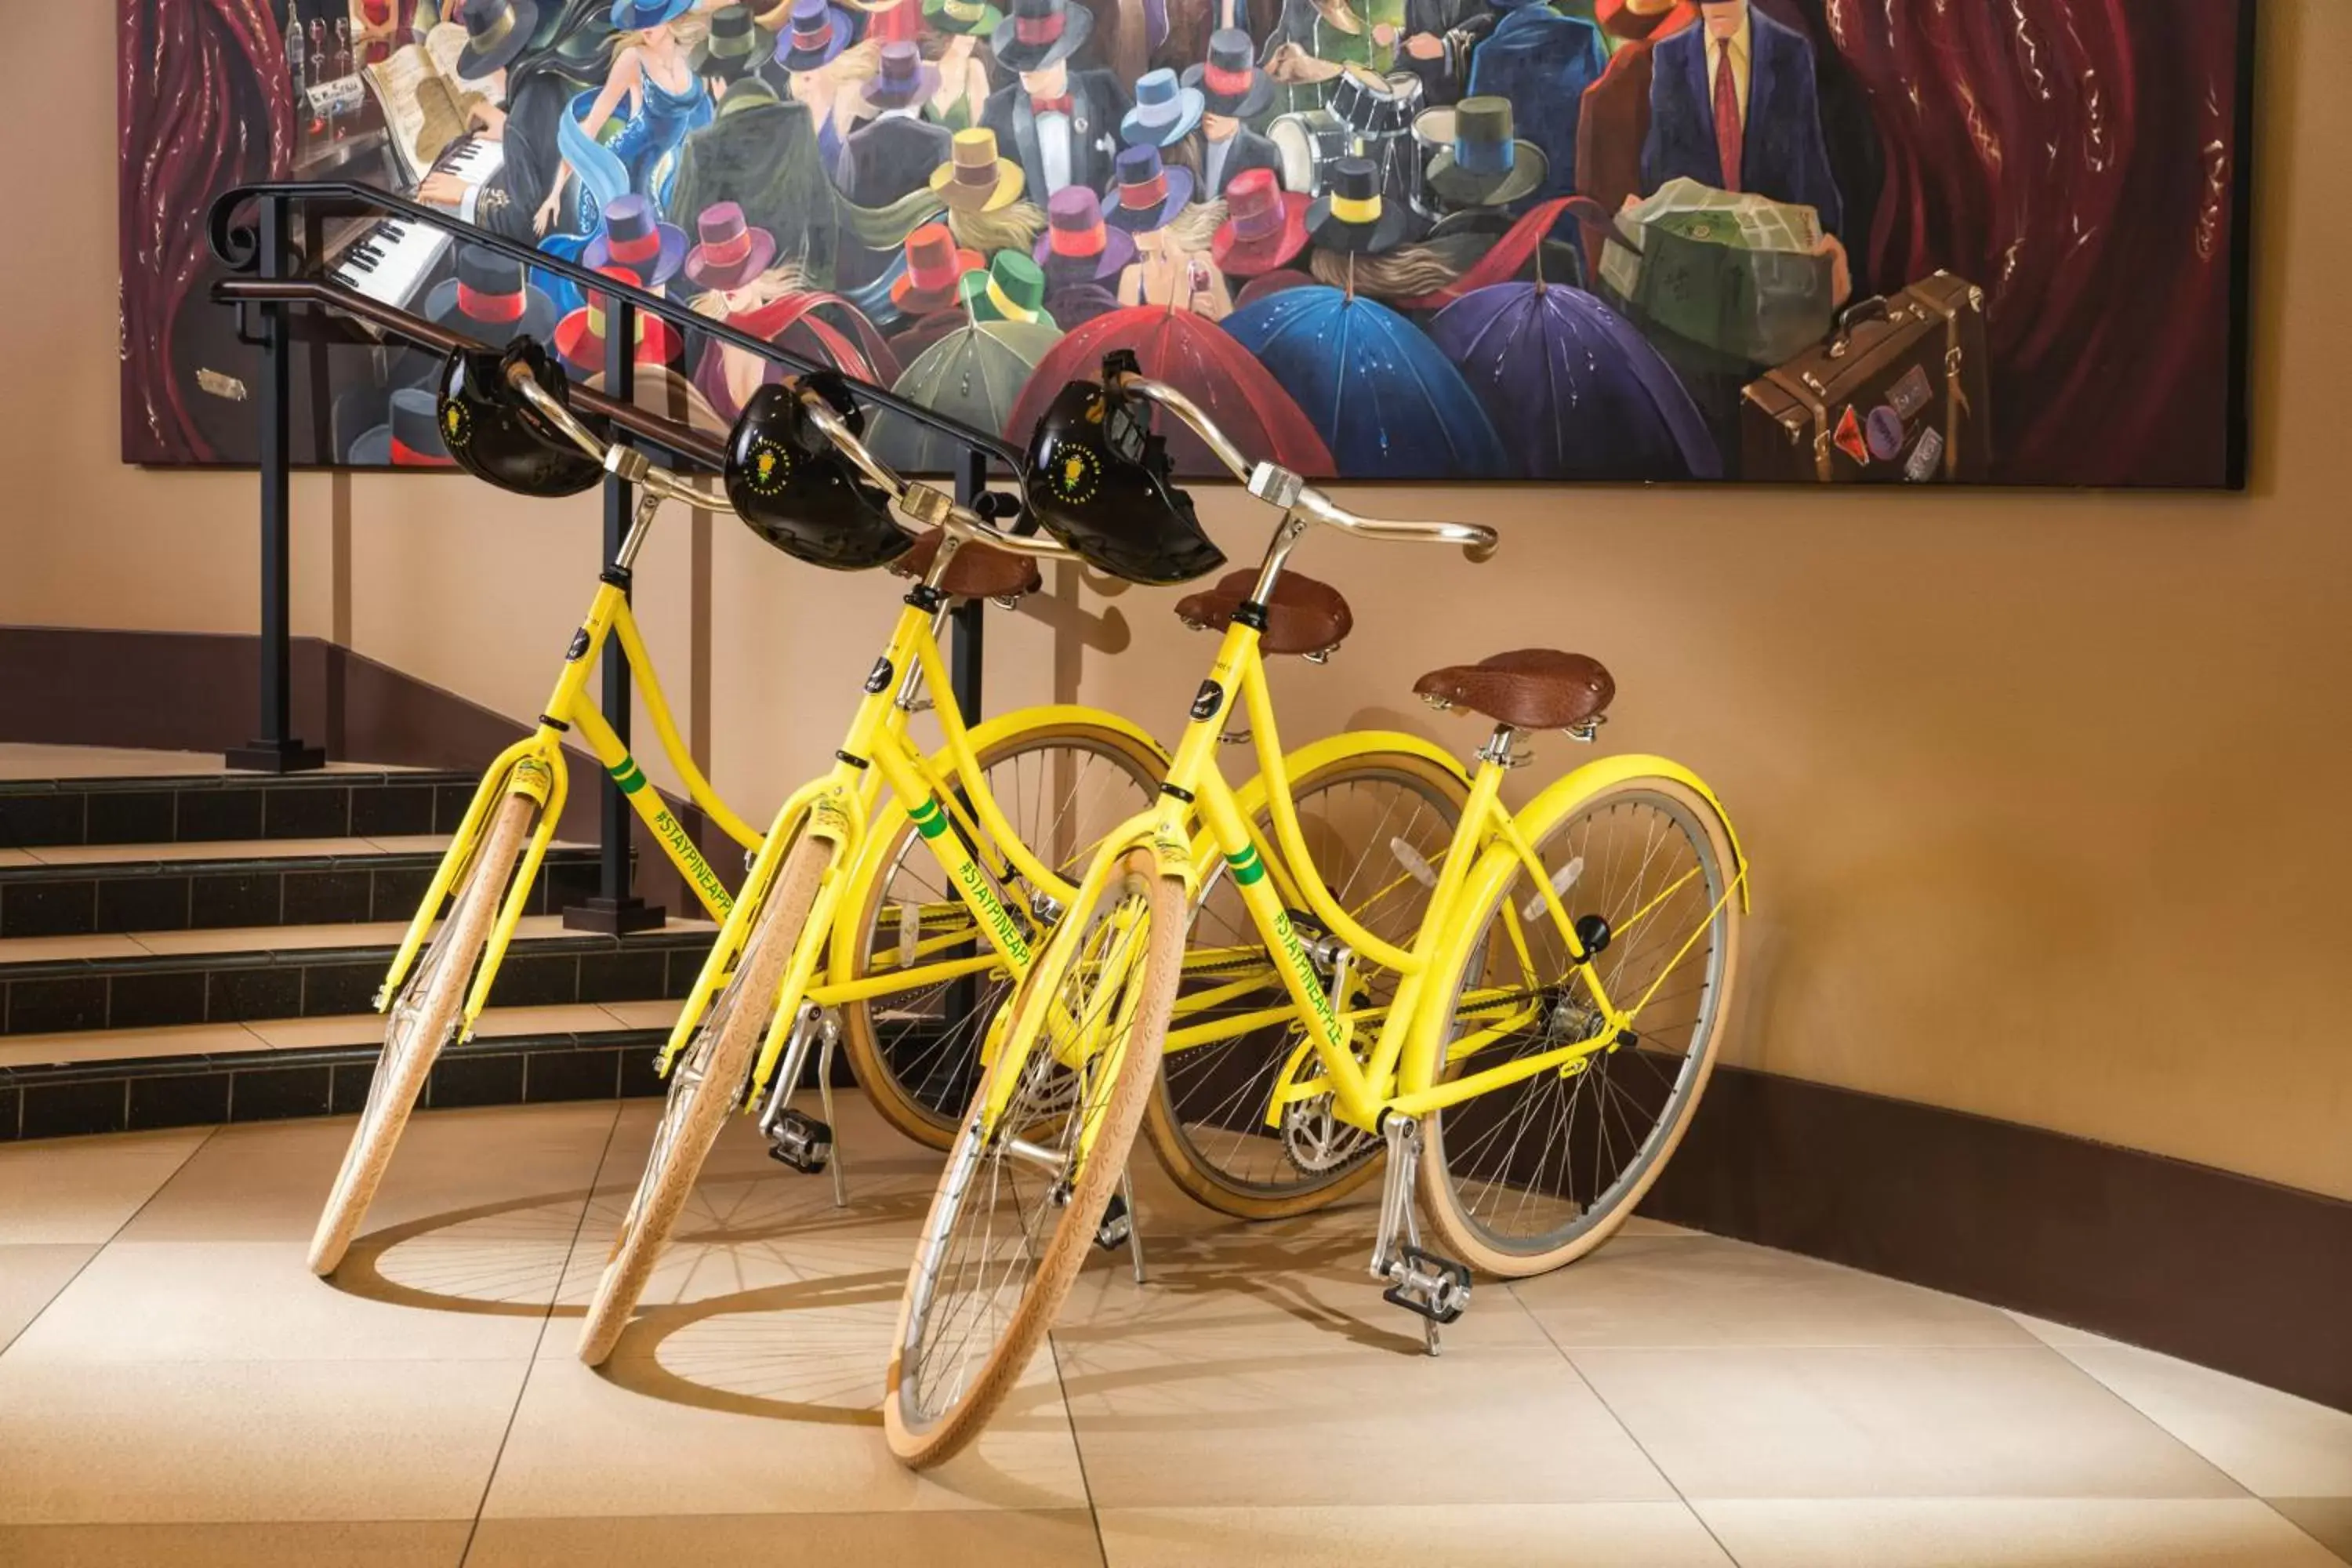 Cycling, Other Activities in Staypineapple, The Maxwell Hotel, Seattle Center Seattle